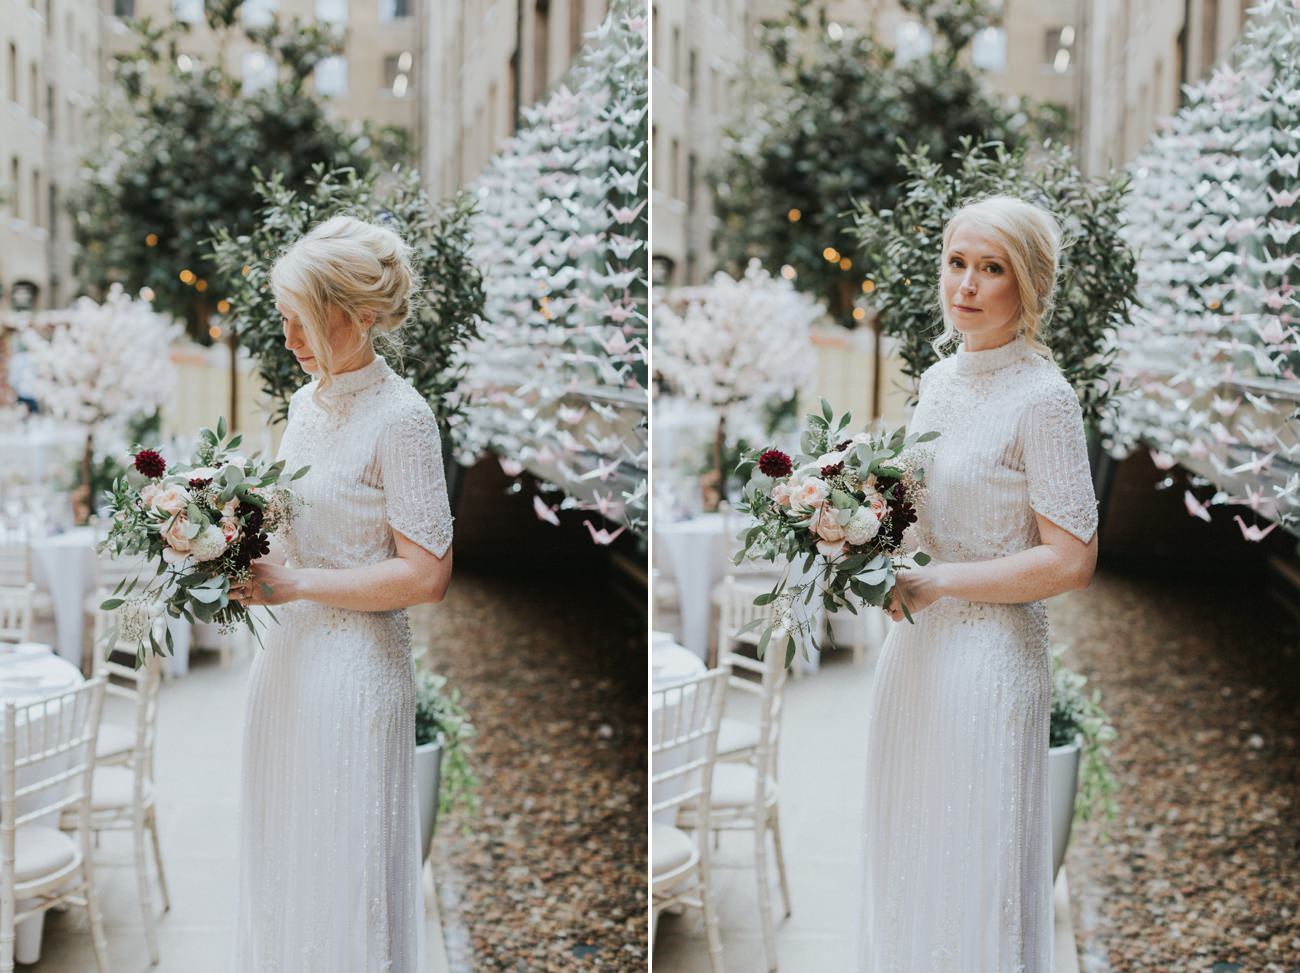 Portraits of a bride in white dress holding and looking at her bouquet.
Devonshire Terrace Wedding London Alternative Wedding Photographer